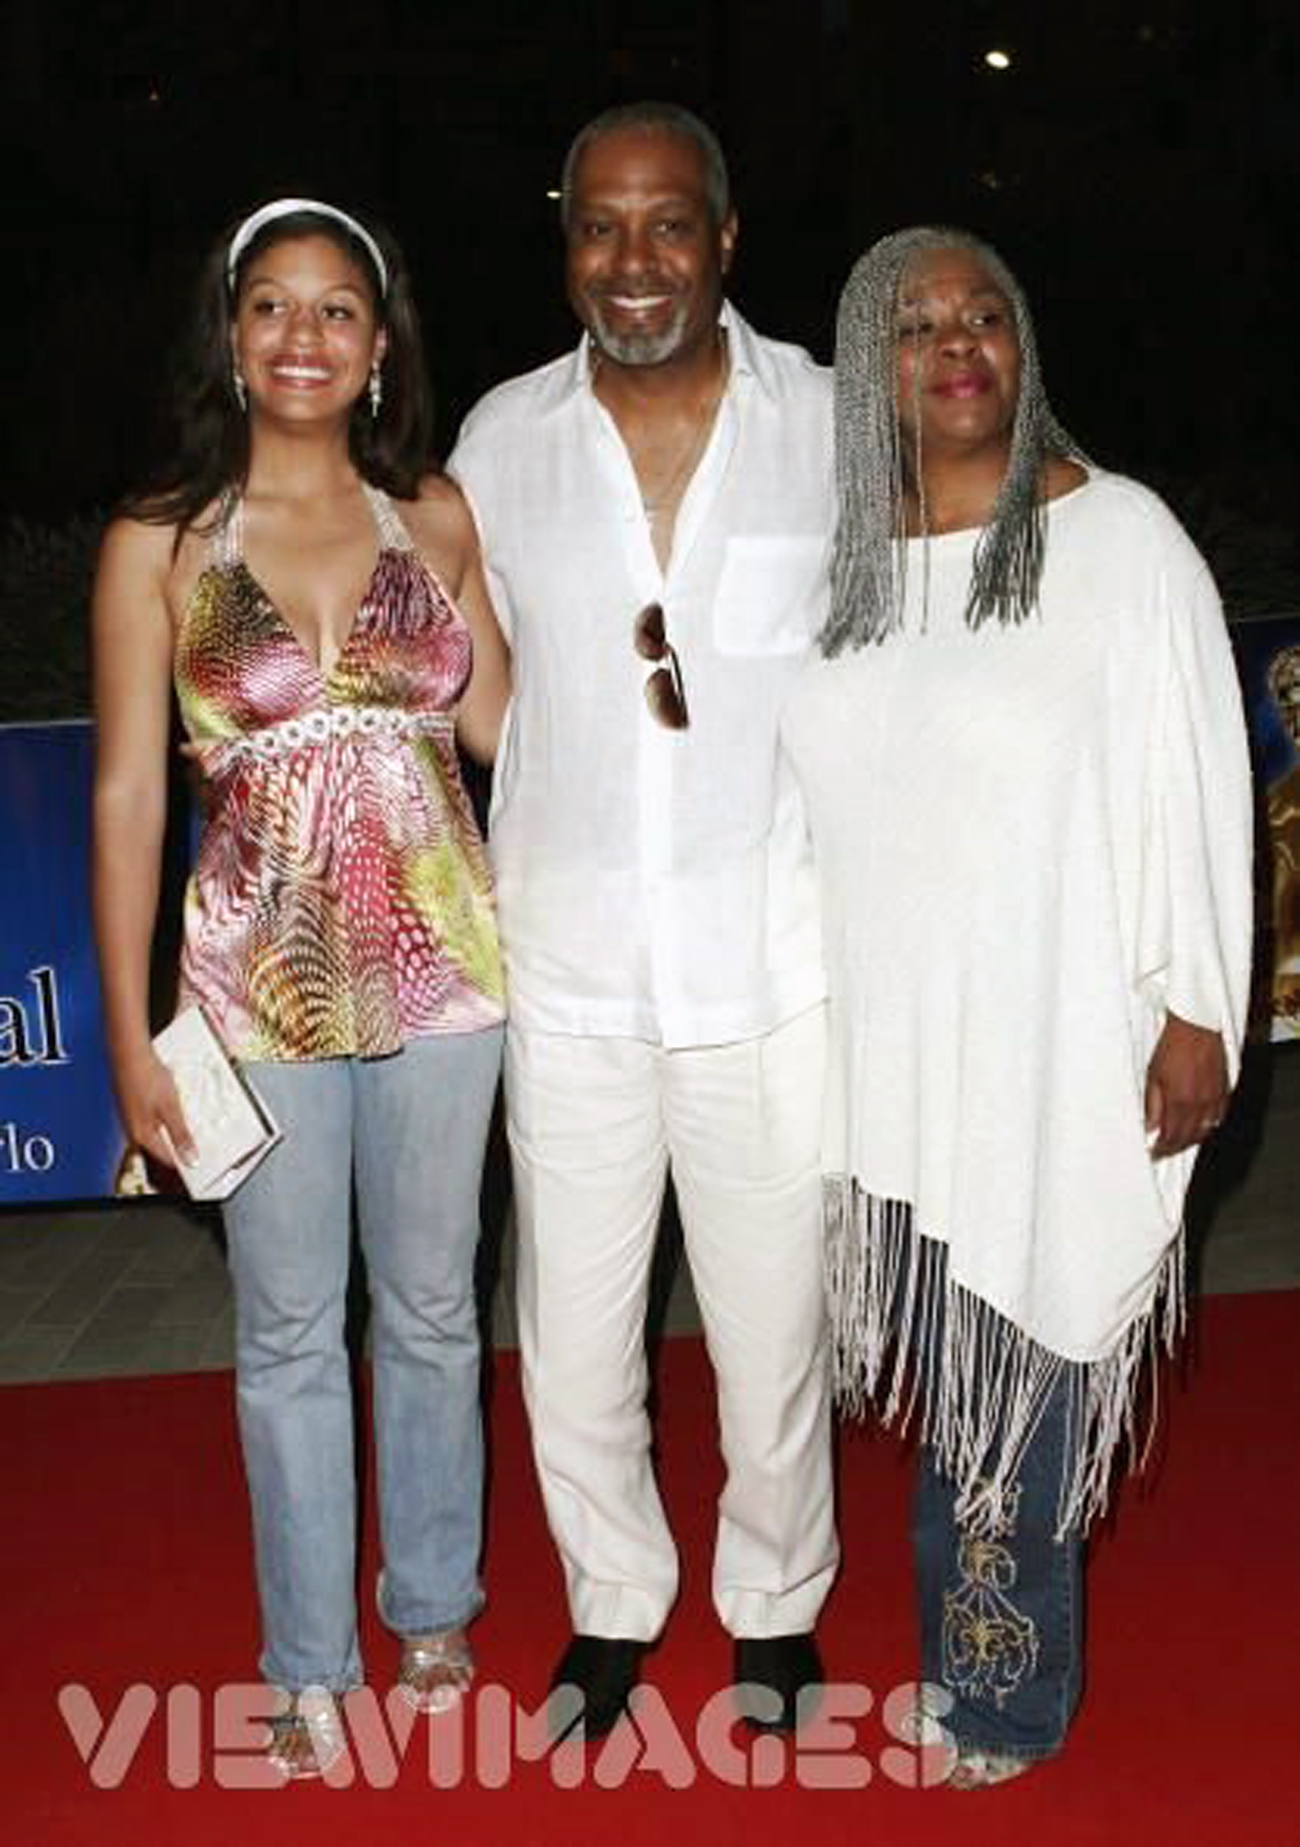 James Pickens Jr. arrives with wife and daughter at the party of Rose des vents during the 46th annual Monte Carlo Television Festival (2006)